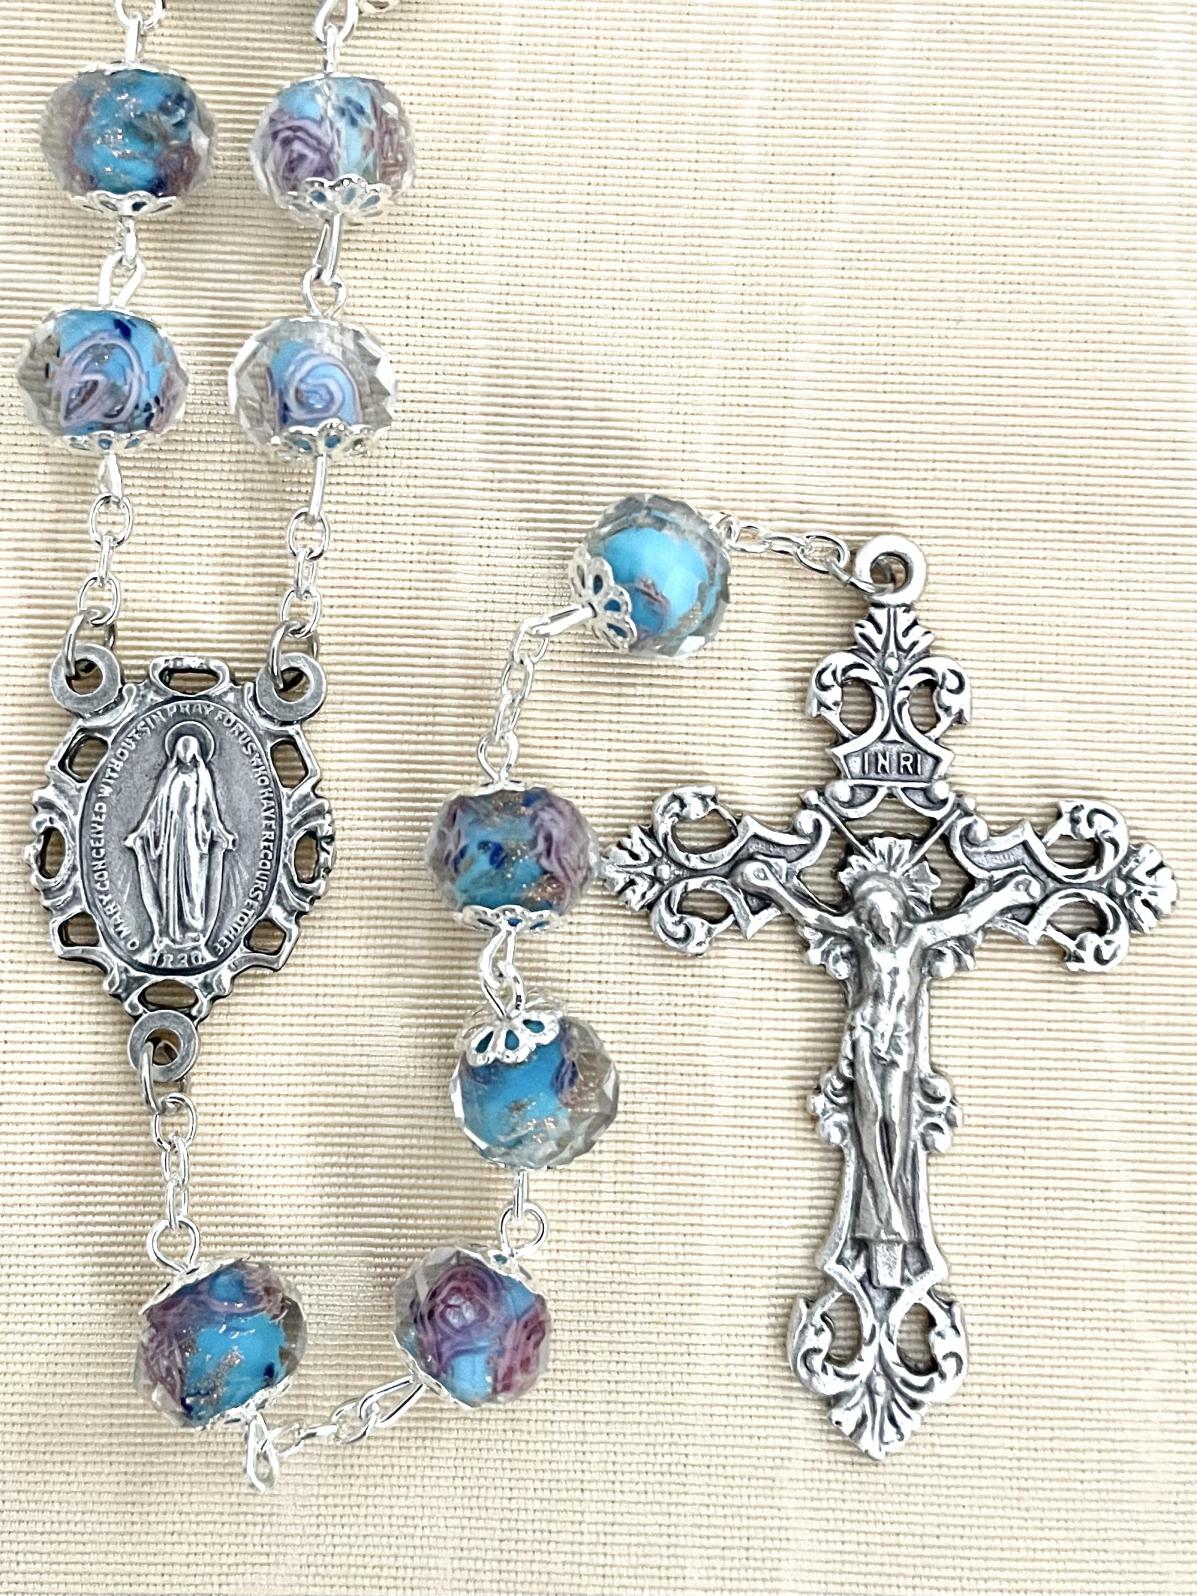 10X8 AQUA CRYSTAL HAND PAINTED ROSE ROSARY WITH CAPS. GIFT BOXED